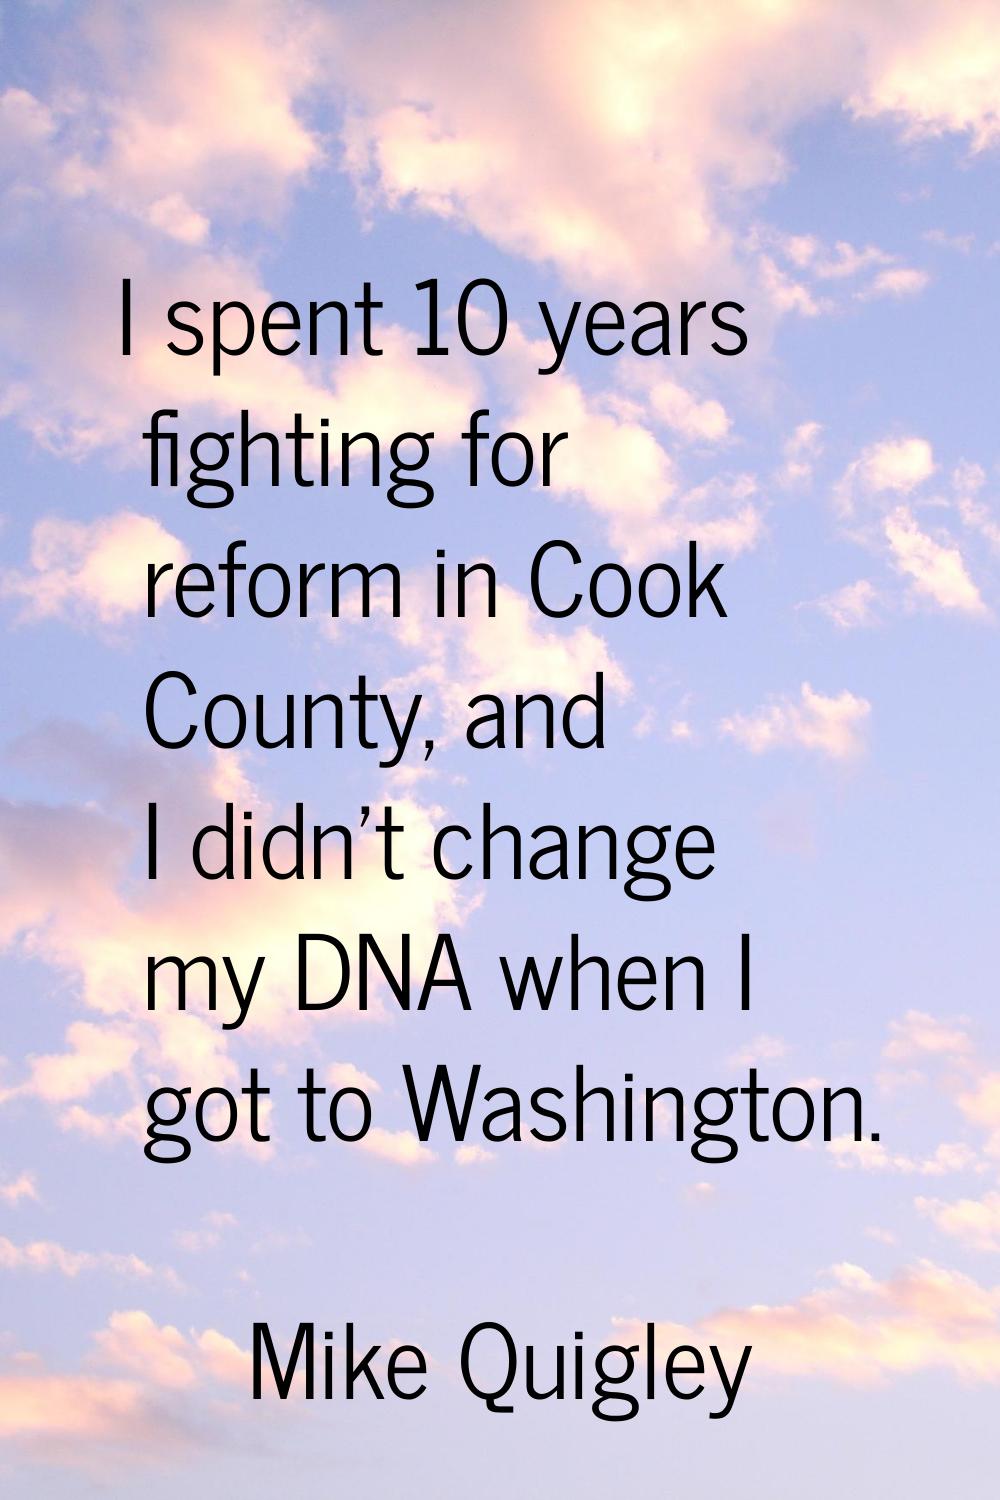 I spent 10 years fighting for reform in Cook County, and I didn't change my DNA when I got to Washi